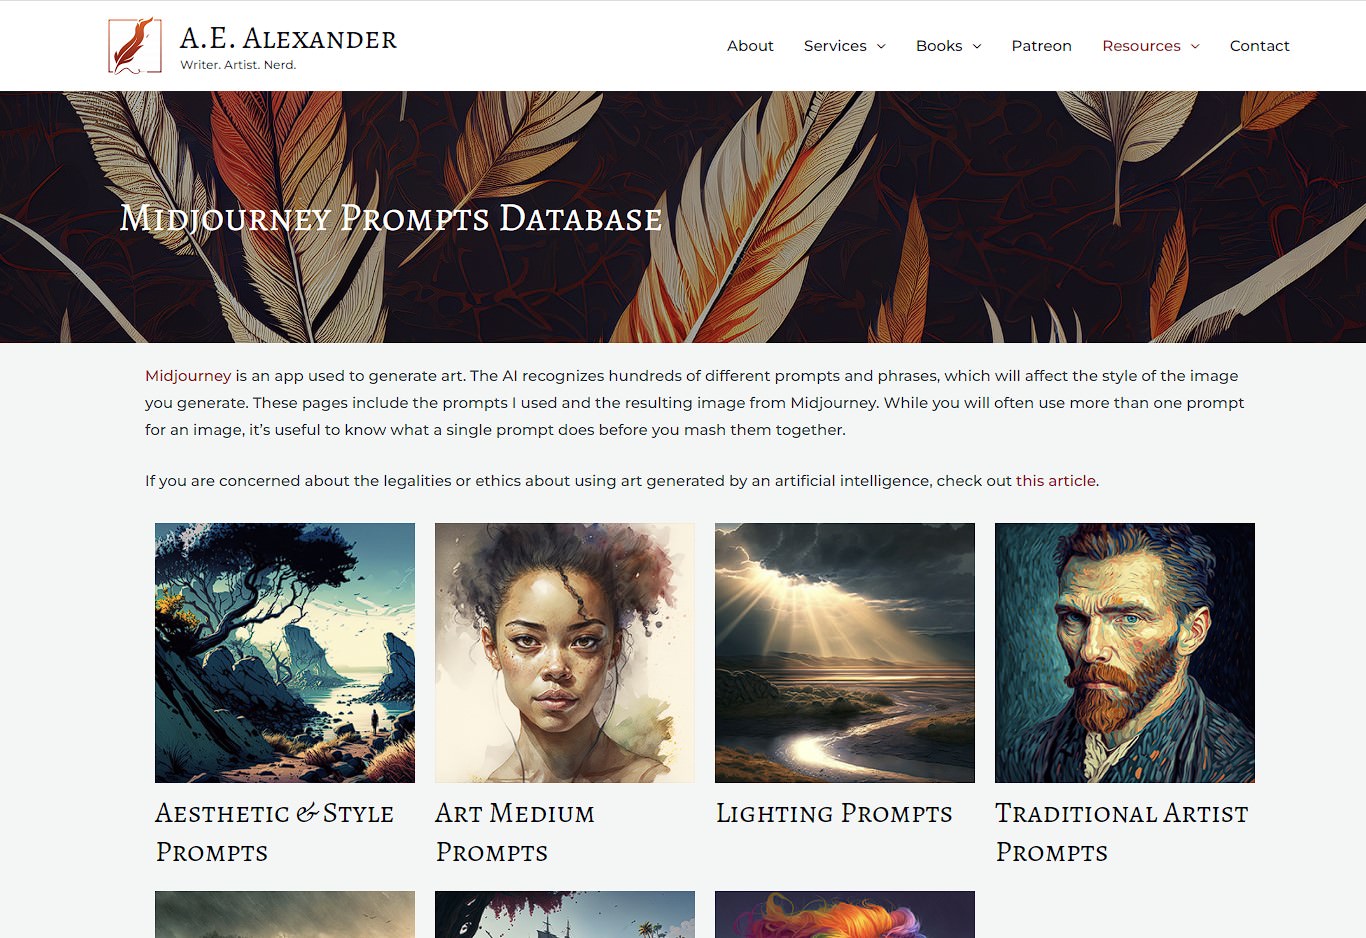 Midjourney Prompt Resources - A E Alexander's Midjourney Prompts